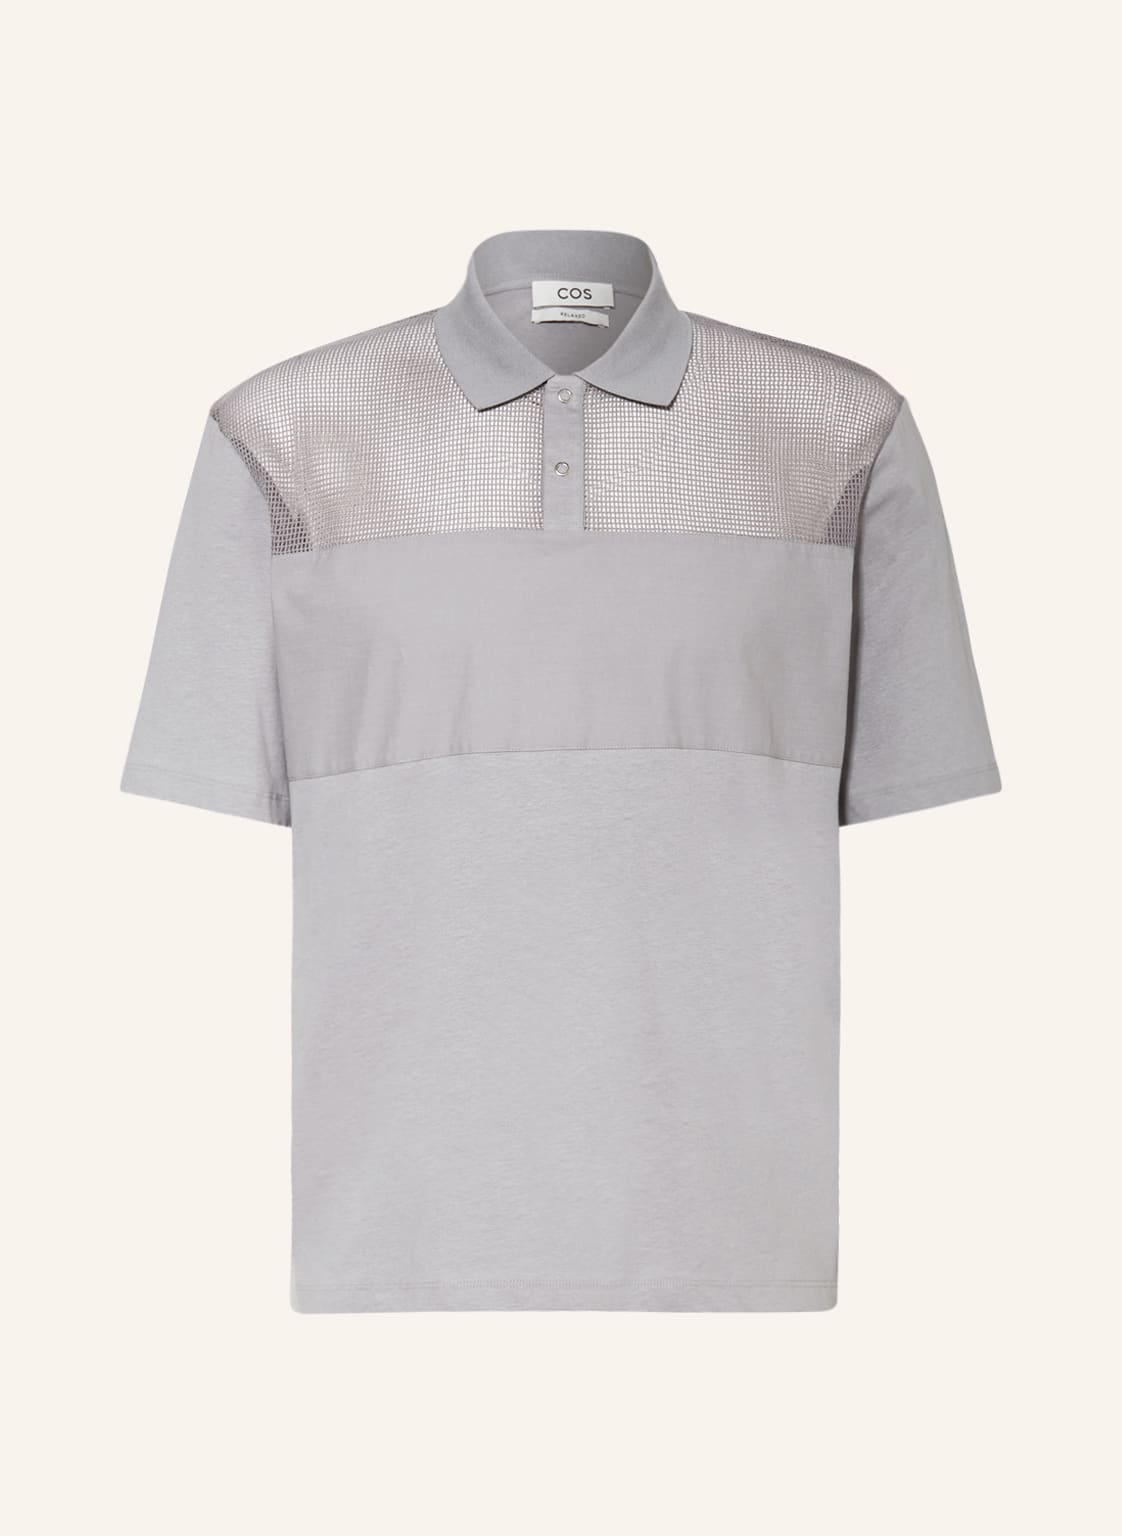 Cos Jersey-Poloshirt Relaxed Fit grau von COS